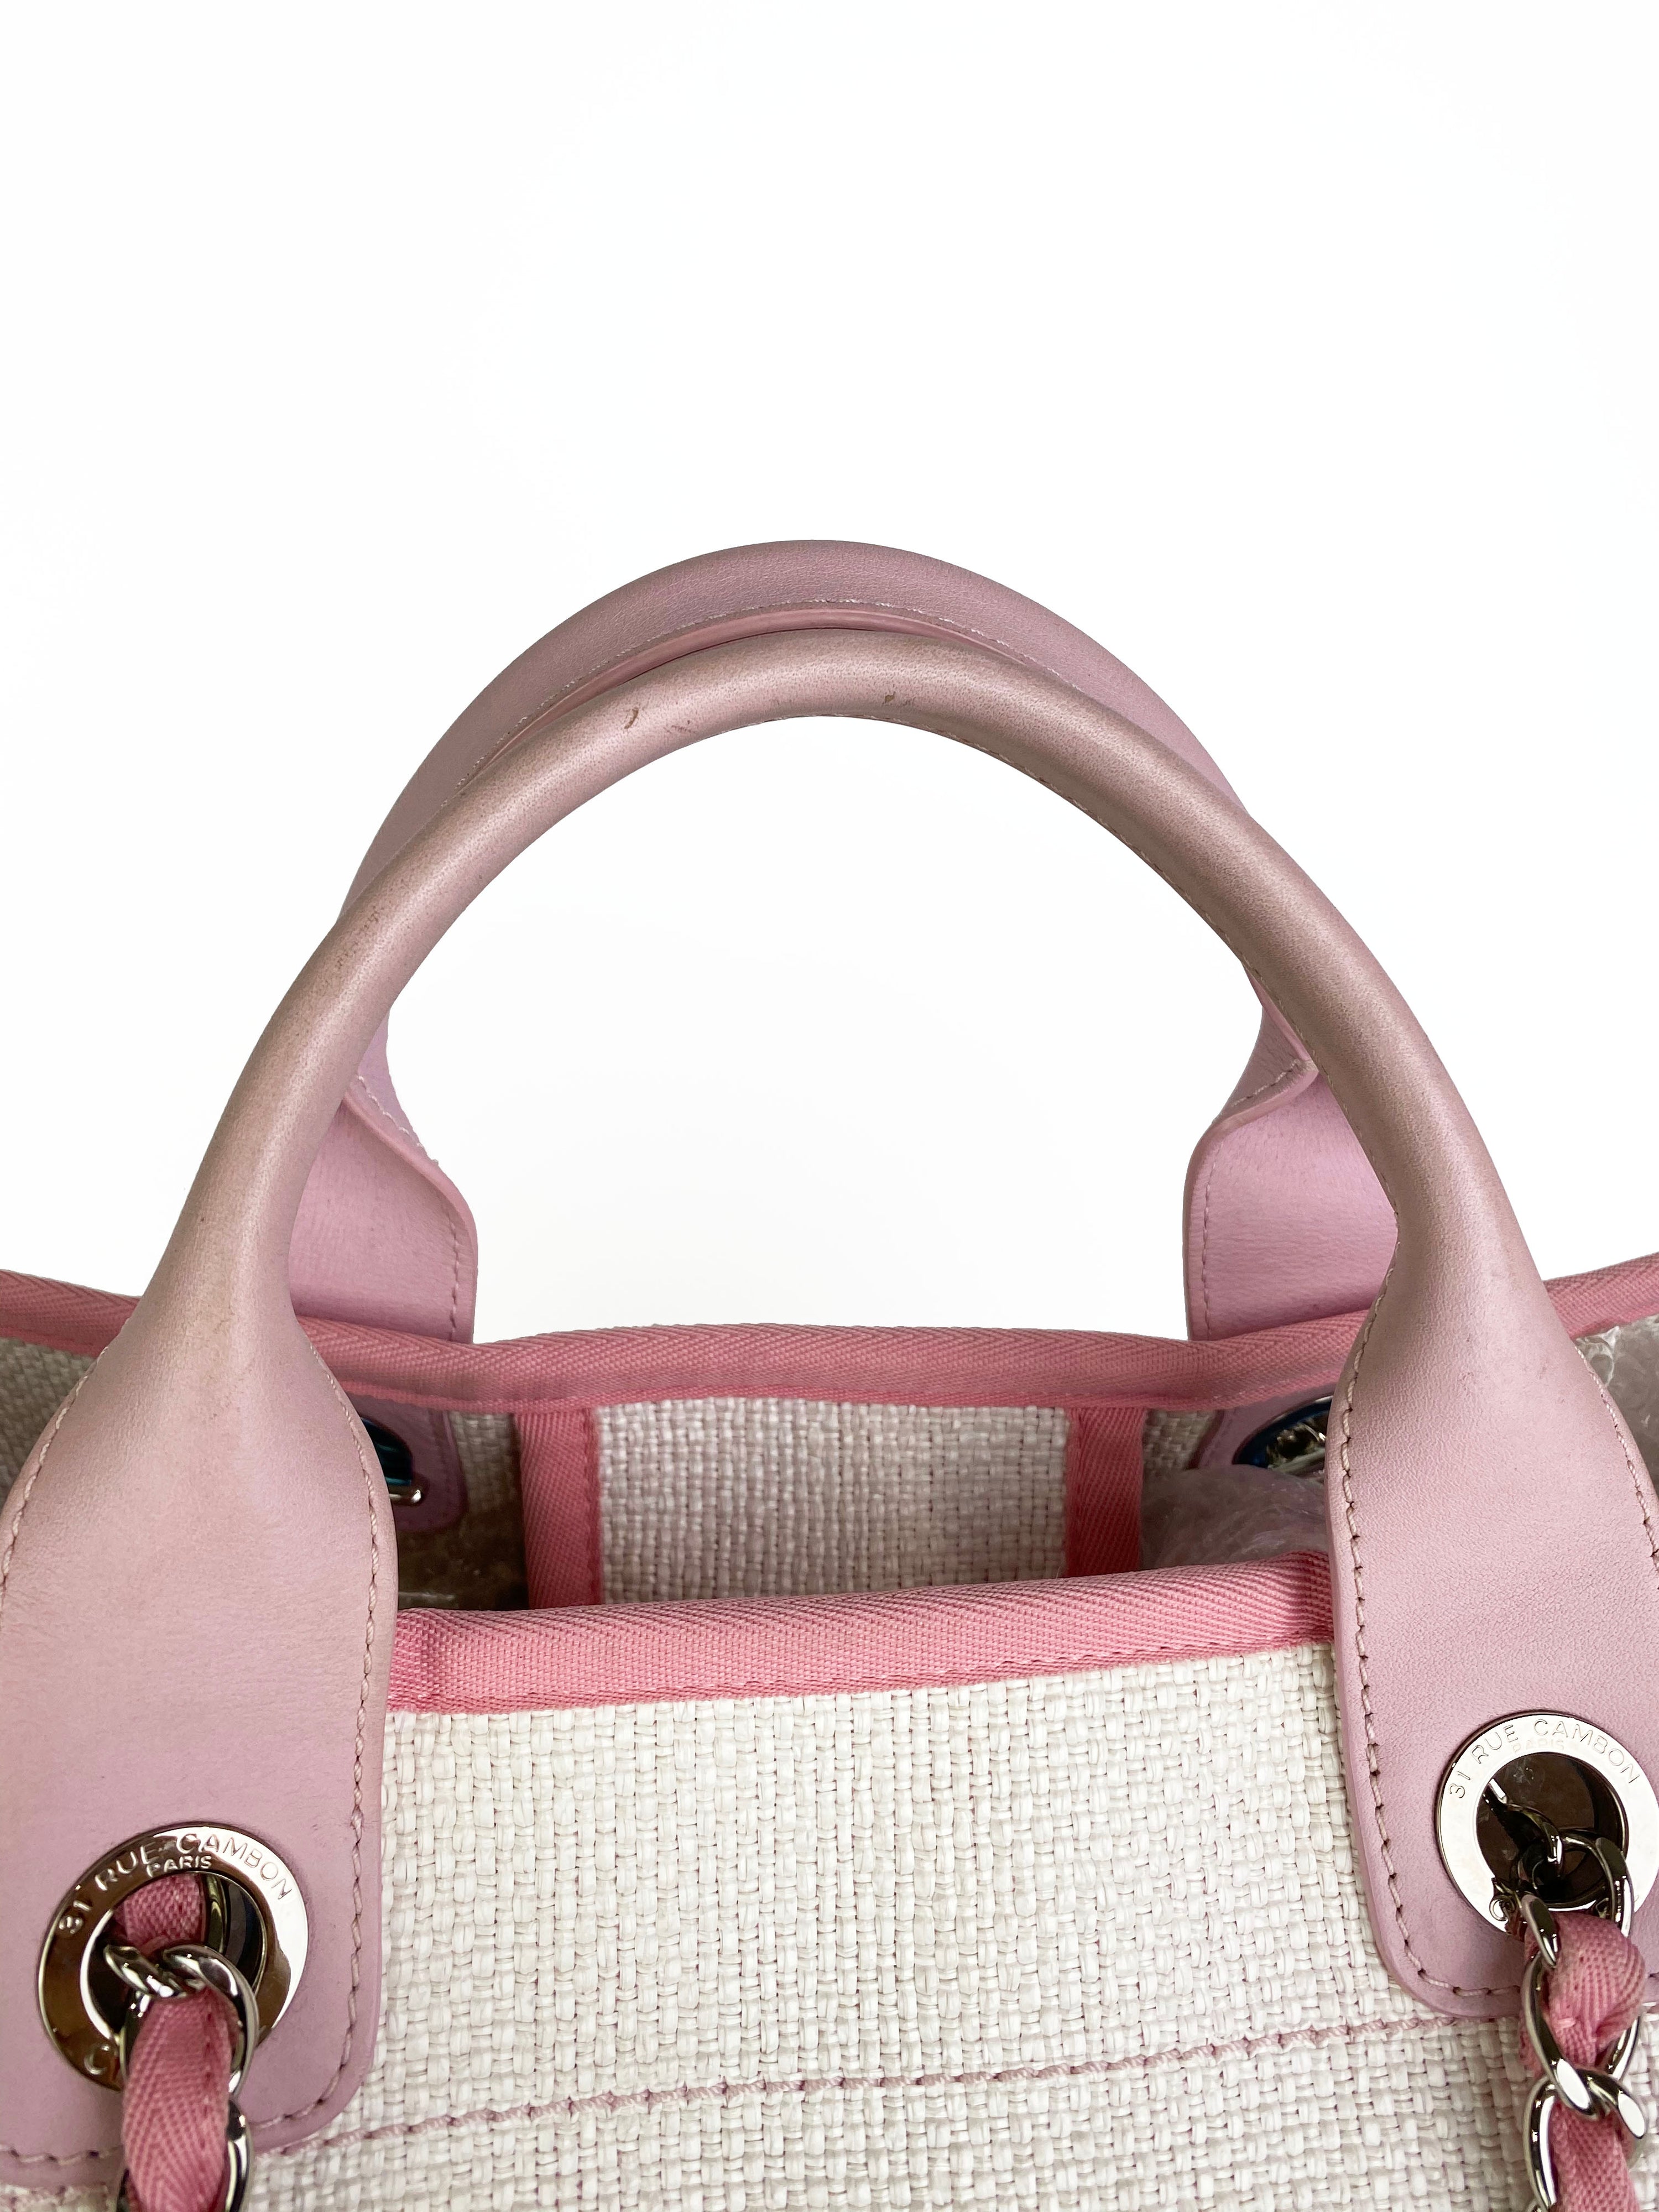 Chanel Pink & White Deauville Tote